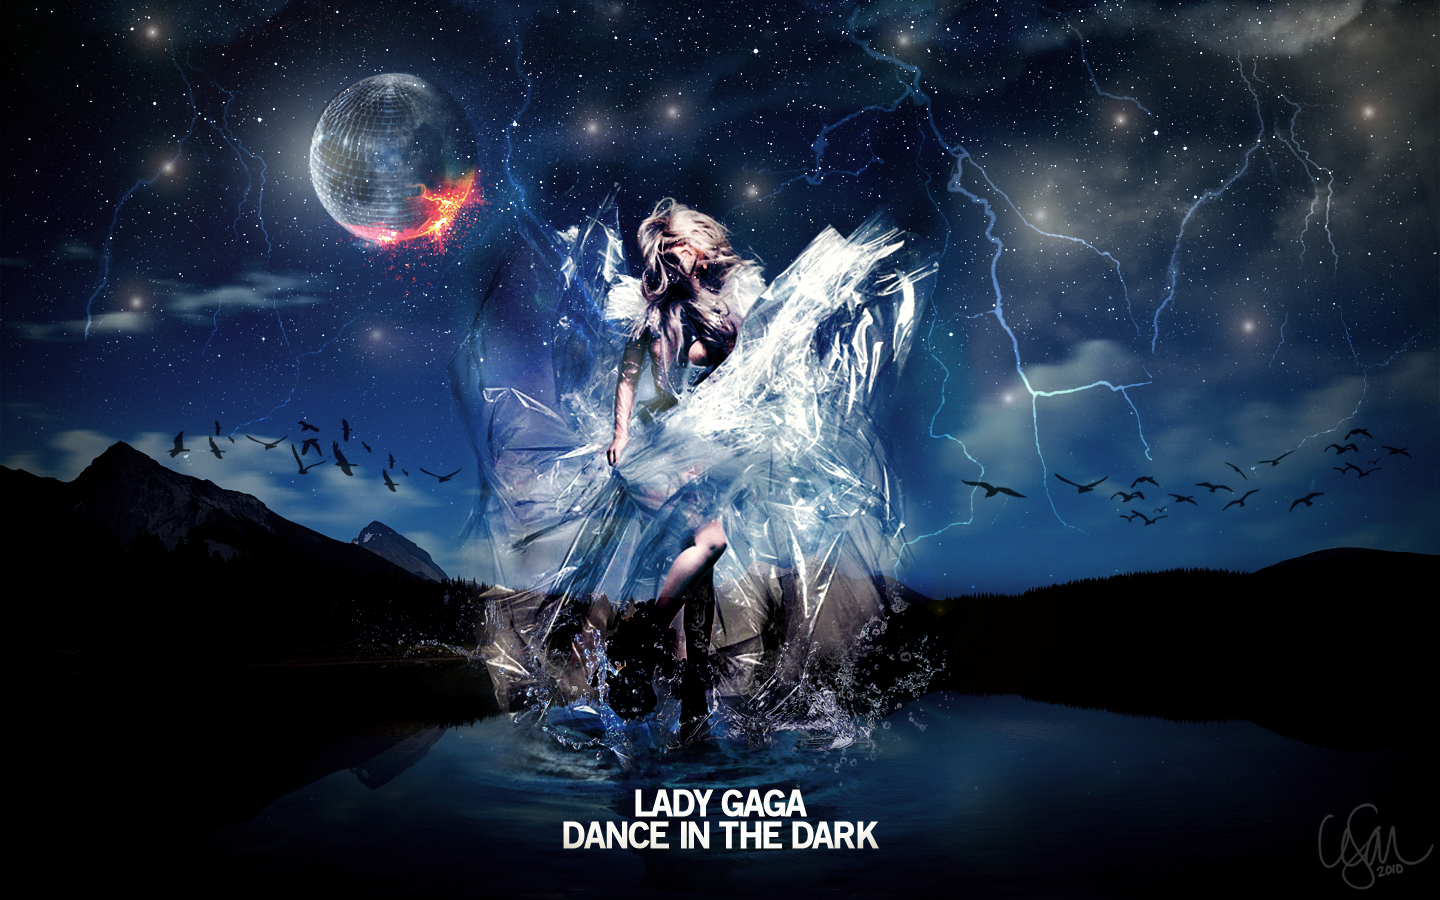 Lady gaga dance текст. Lady Gaga Canvas. Marry the Night леди Гага. Dancer in the Dark. Dance in Darkness.